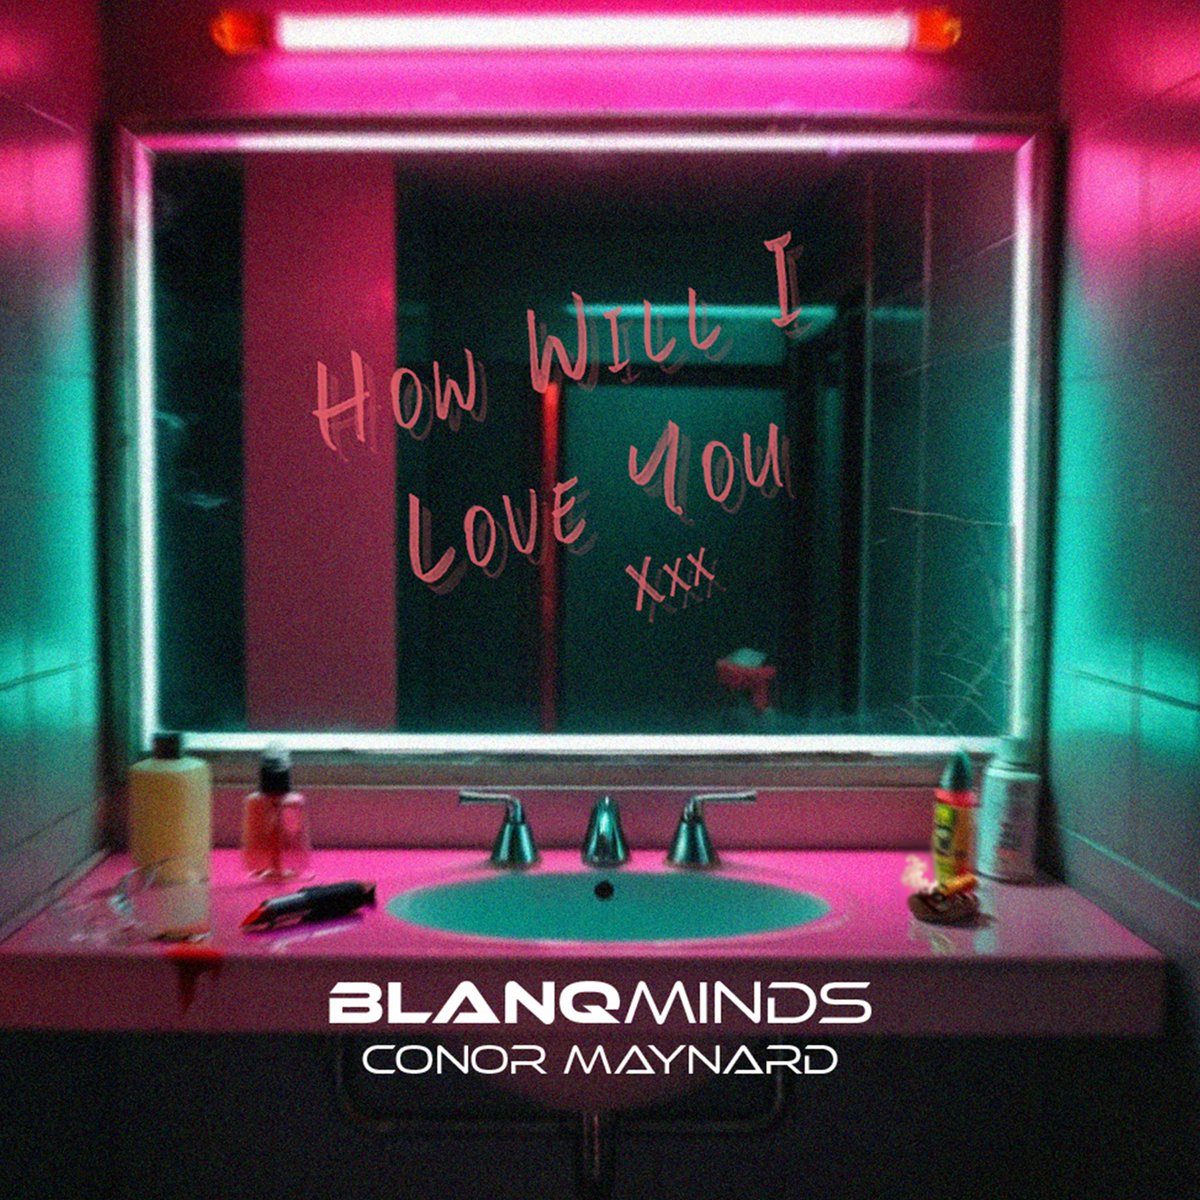 How Will I Love You ft. @ConorMaynard THIS FRIDAY 🔥
Can’t believe I’m finally releasing my first single! We’ve been working super hard to bring you original music & this Friday it is FINALLY YOURS! 🙌🏻❤️

Almost feels like a G.O.A.T comeback releasing music with my brother again